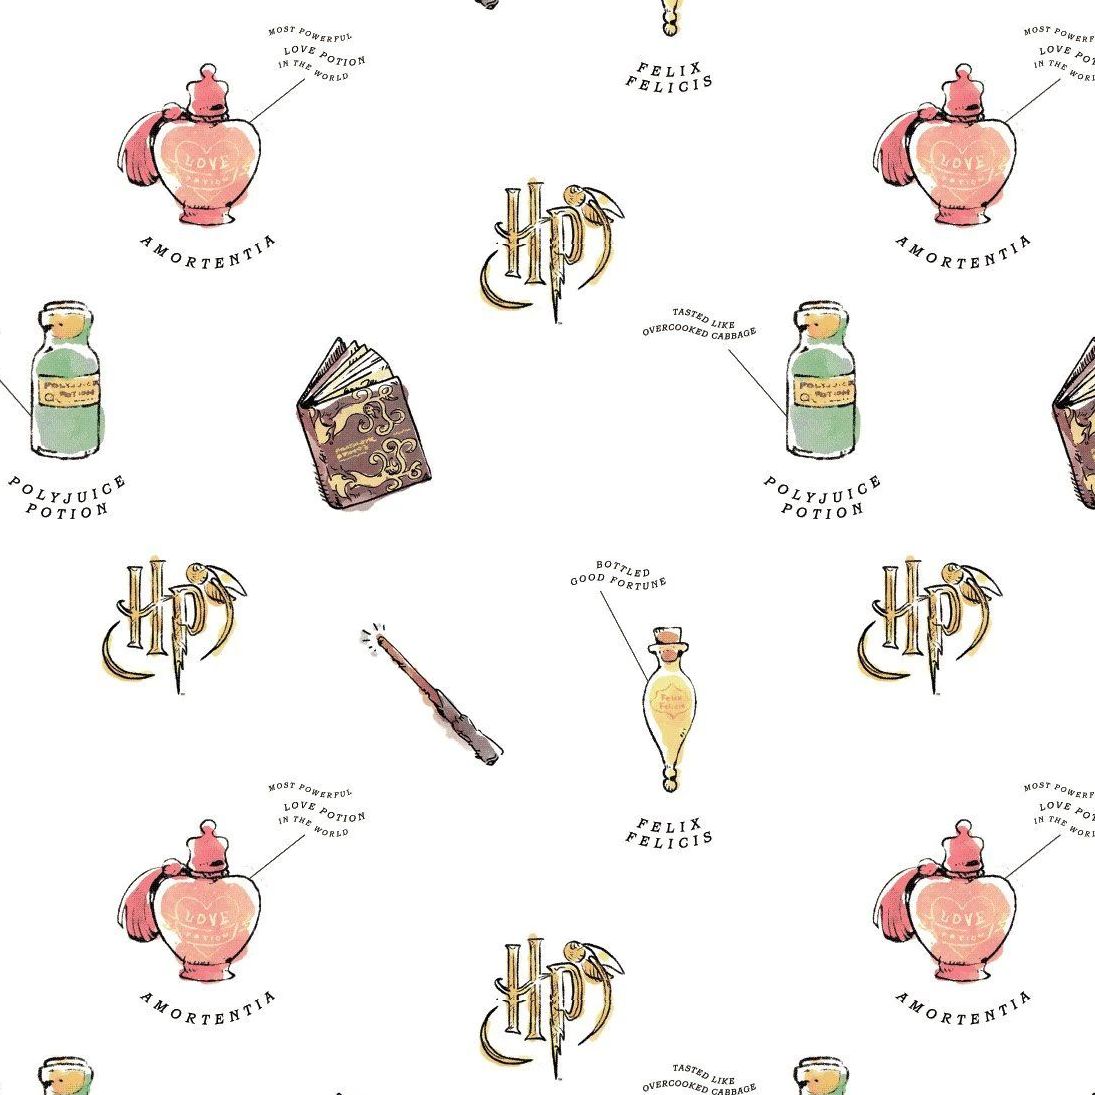 Harry Potter Watercolor Oddities White Polyjuice Potion Felix Felicis Spell Book Magic Wand Cotton Fabric Wizarding World Collection per half metre